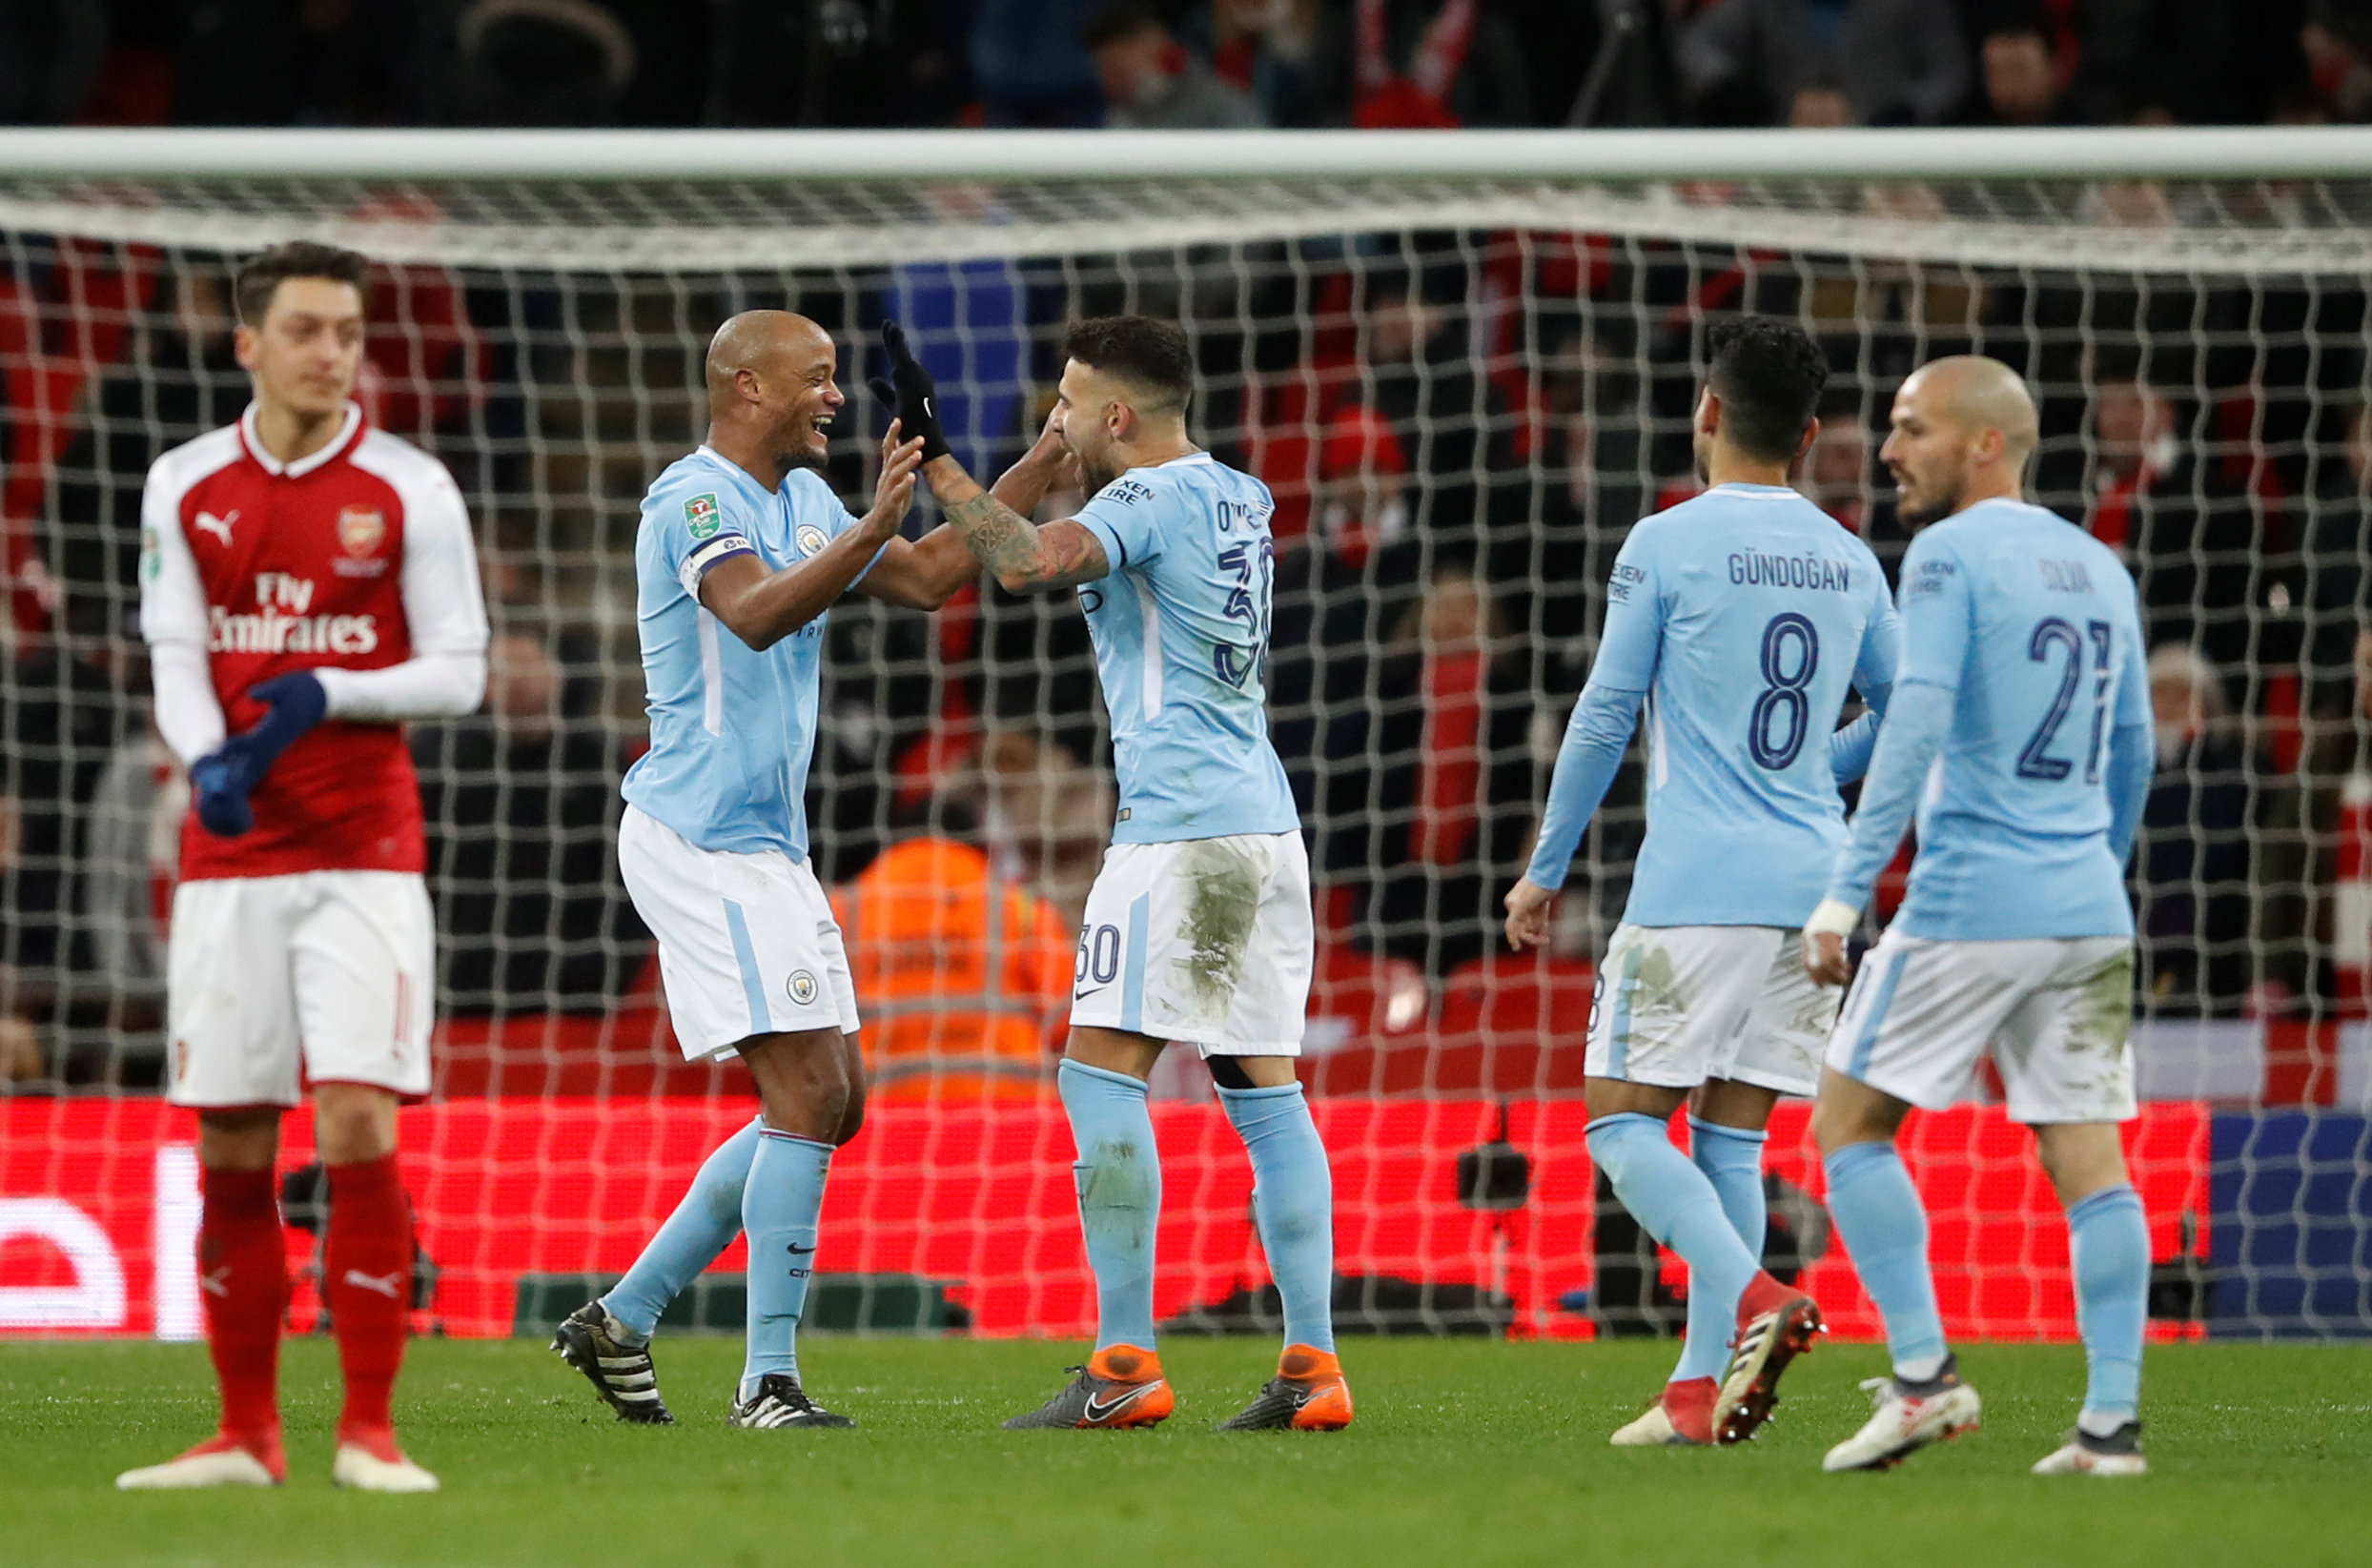 Football: Man City rout Arsenal to lift League Cup